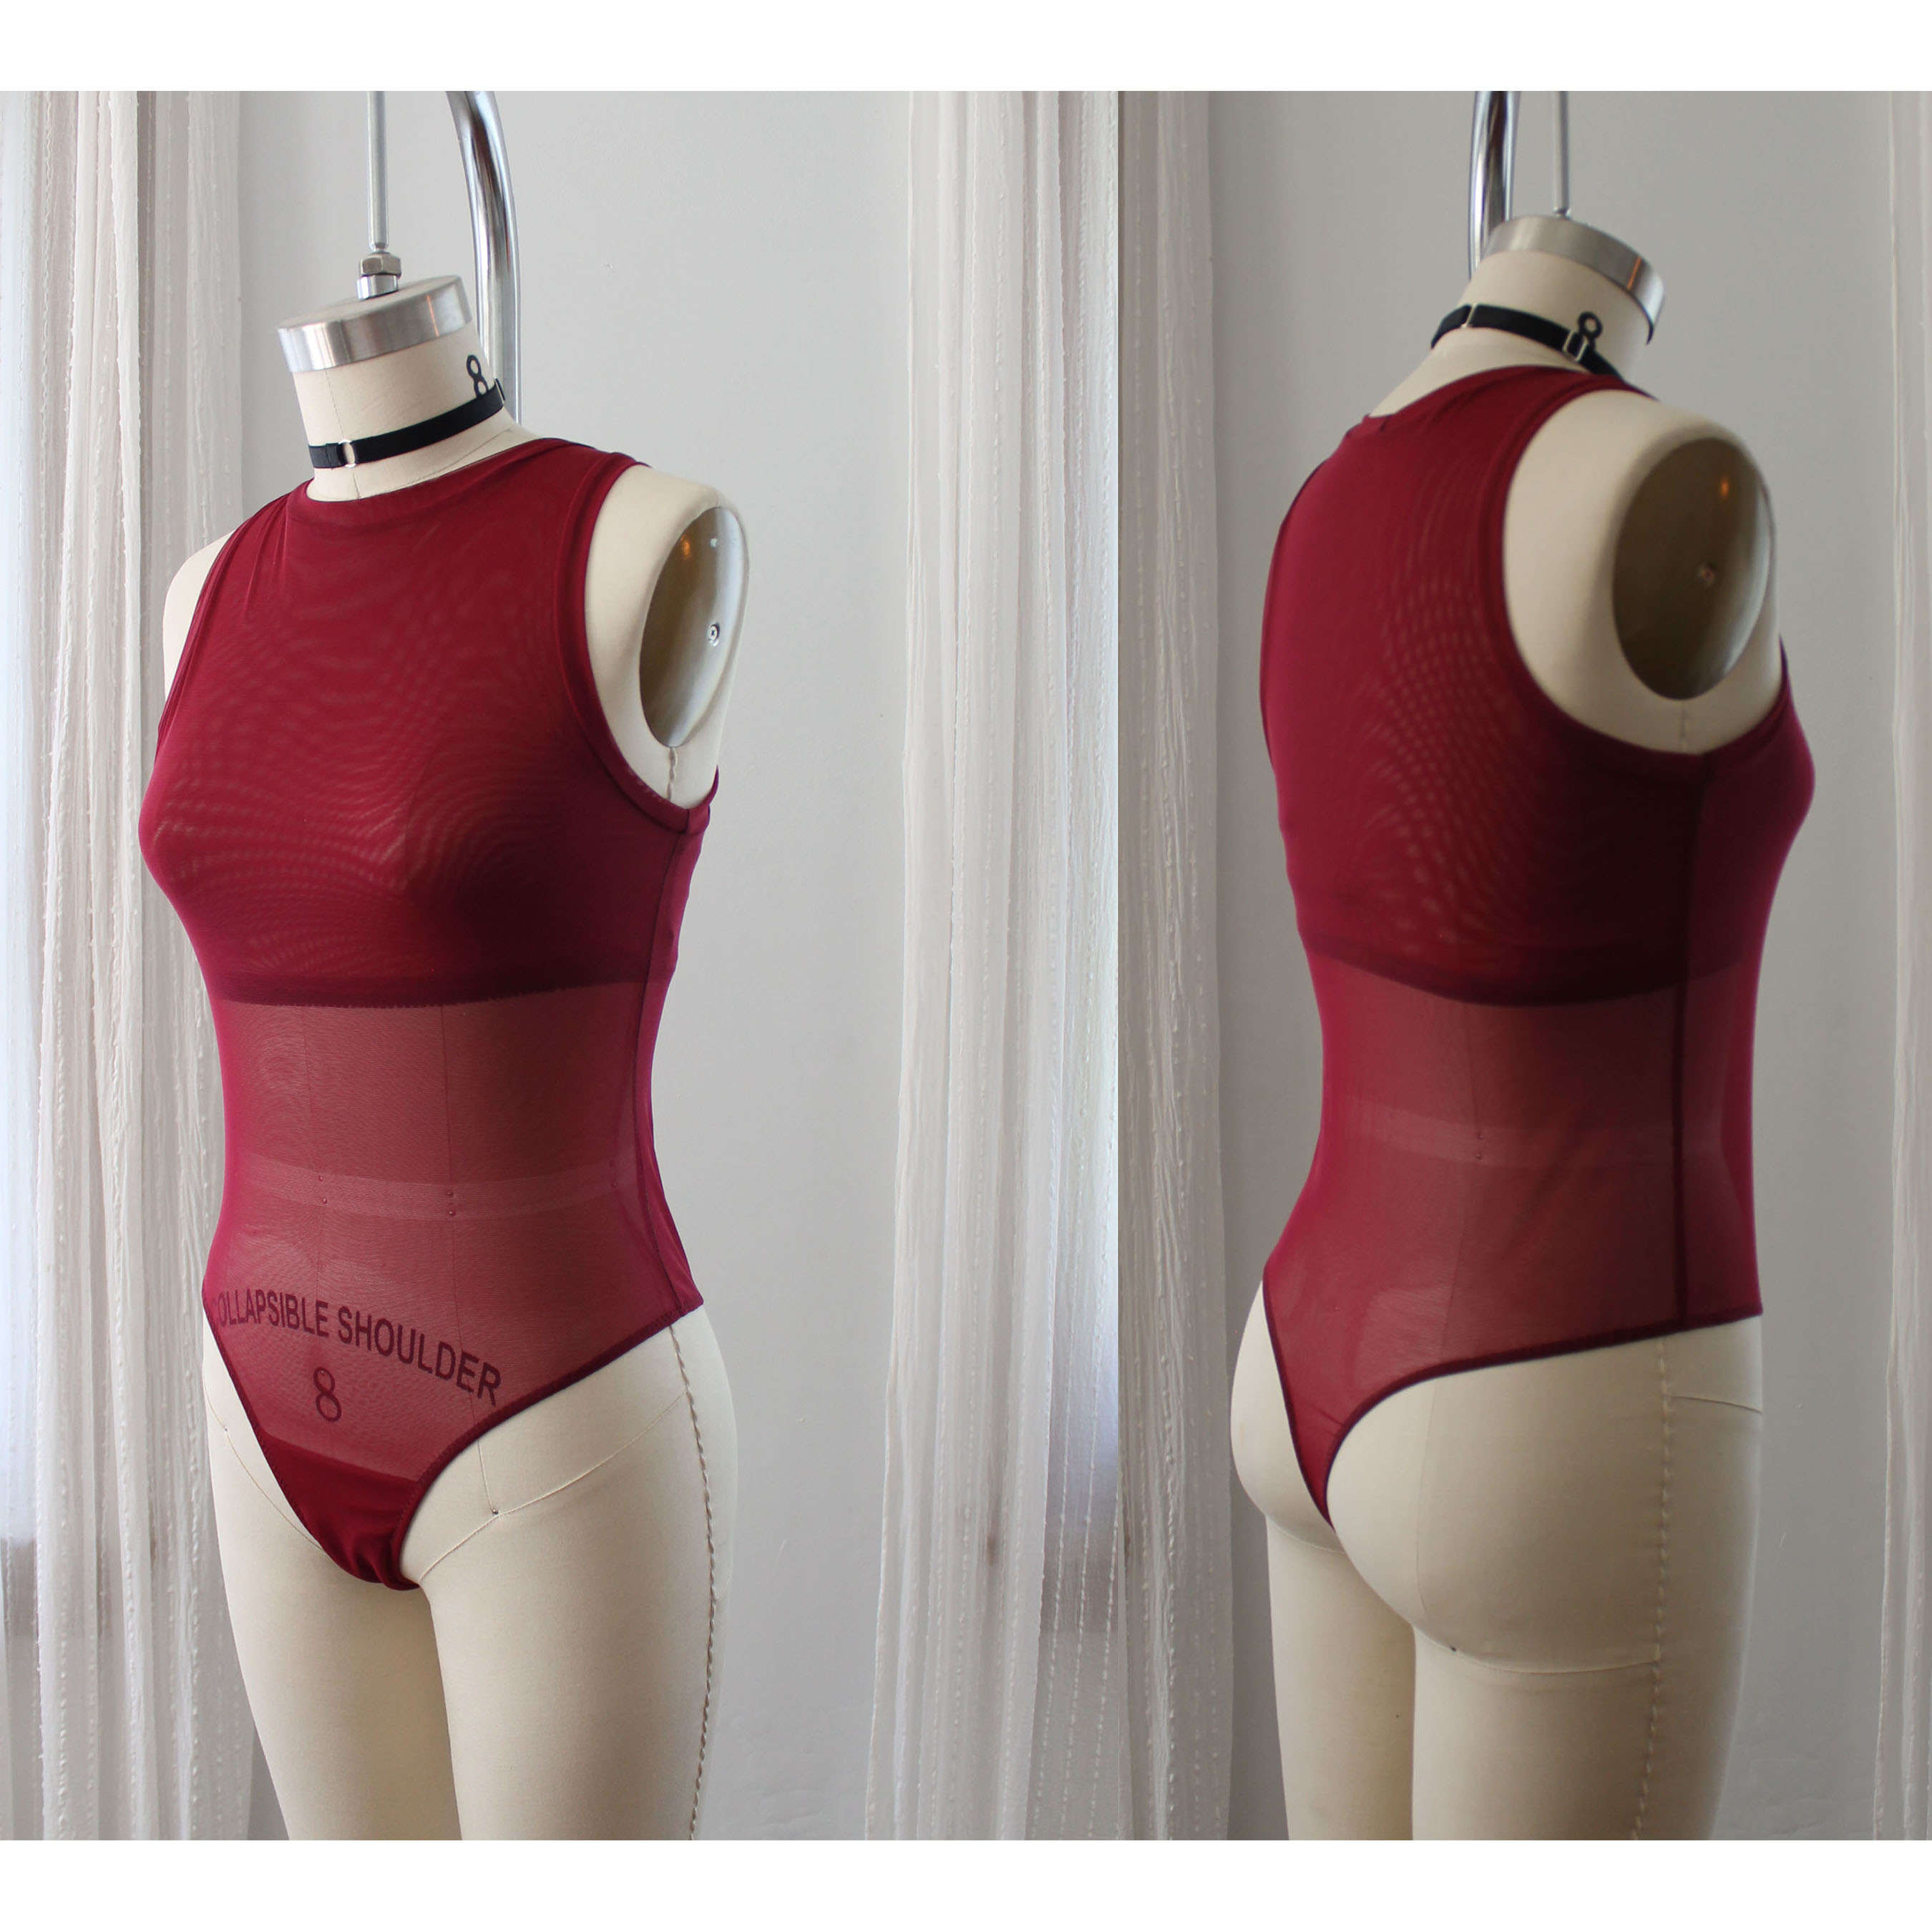 LuLuLingerie - Our Bras Supports your Shoulder and Back. Visit us